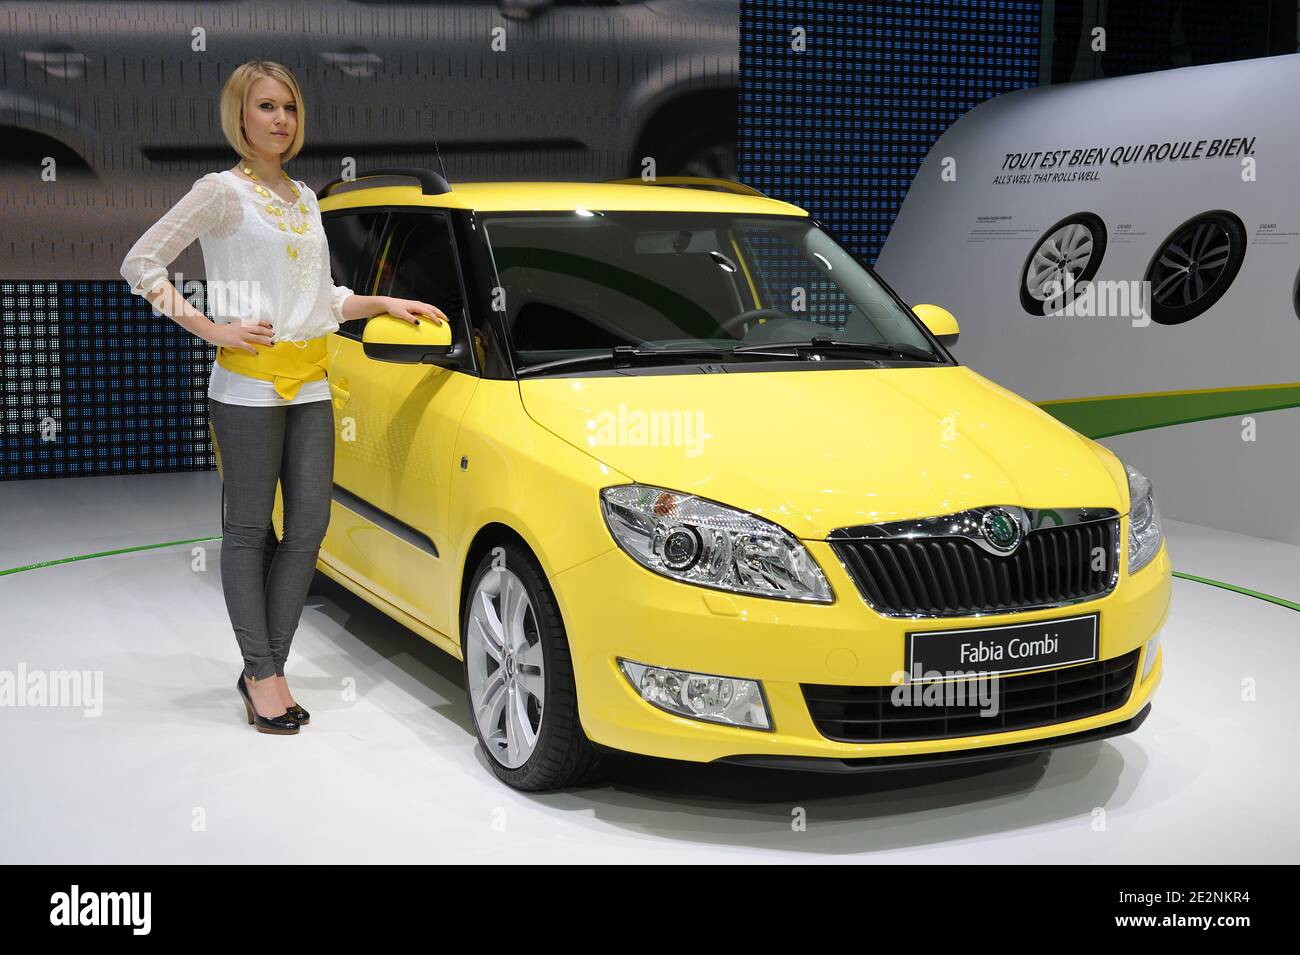 Skoda Fabia Combi High Resolution Stock Photography and Images - Alamy